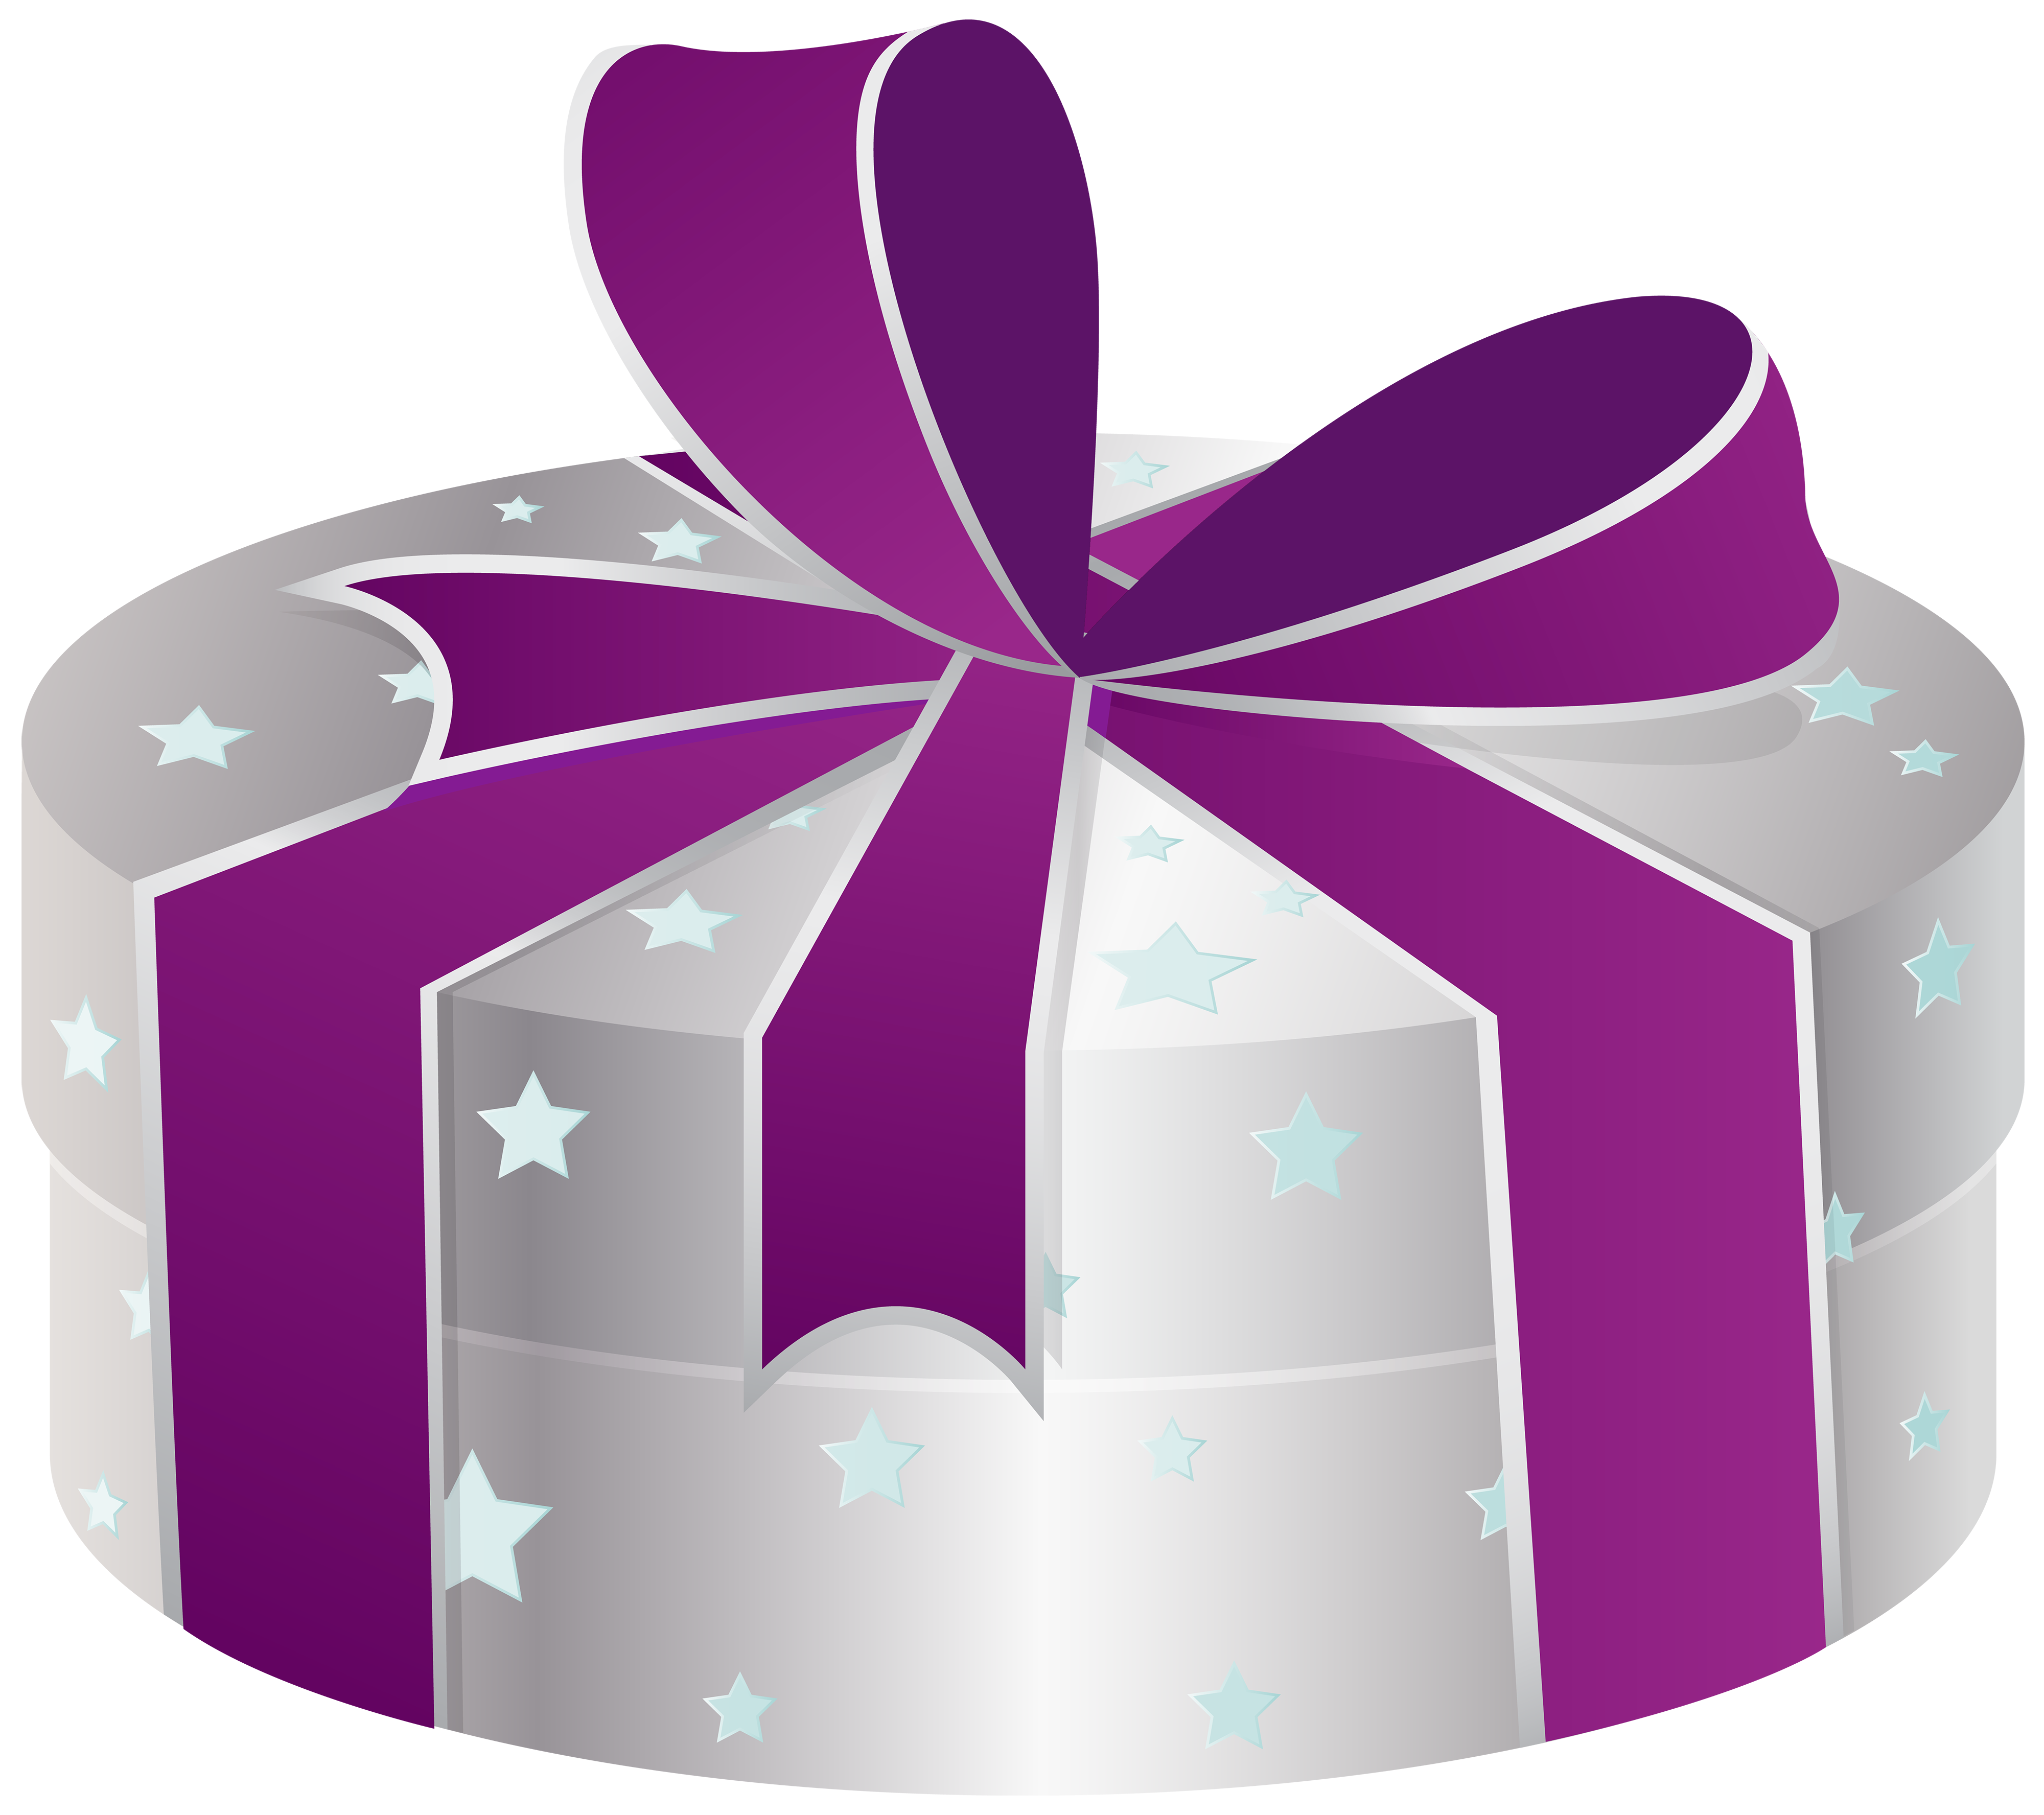 Silver gift box with. Tall clipart realistic